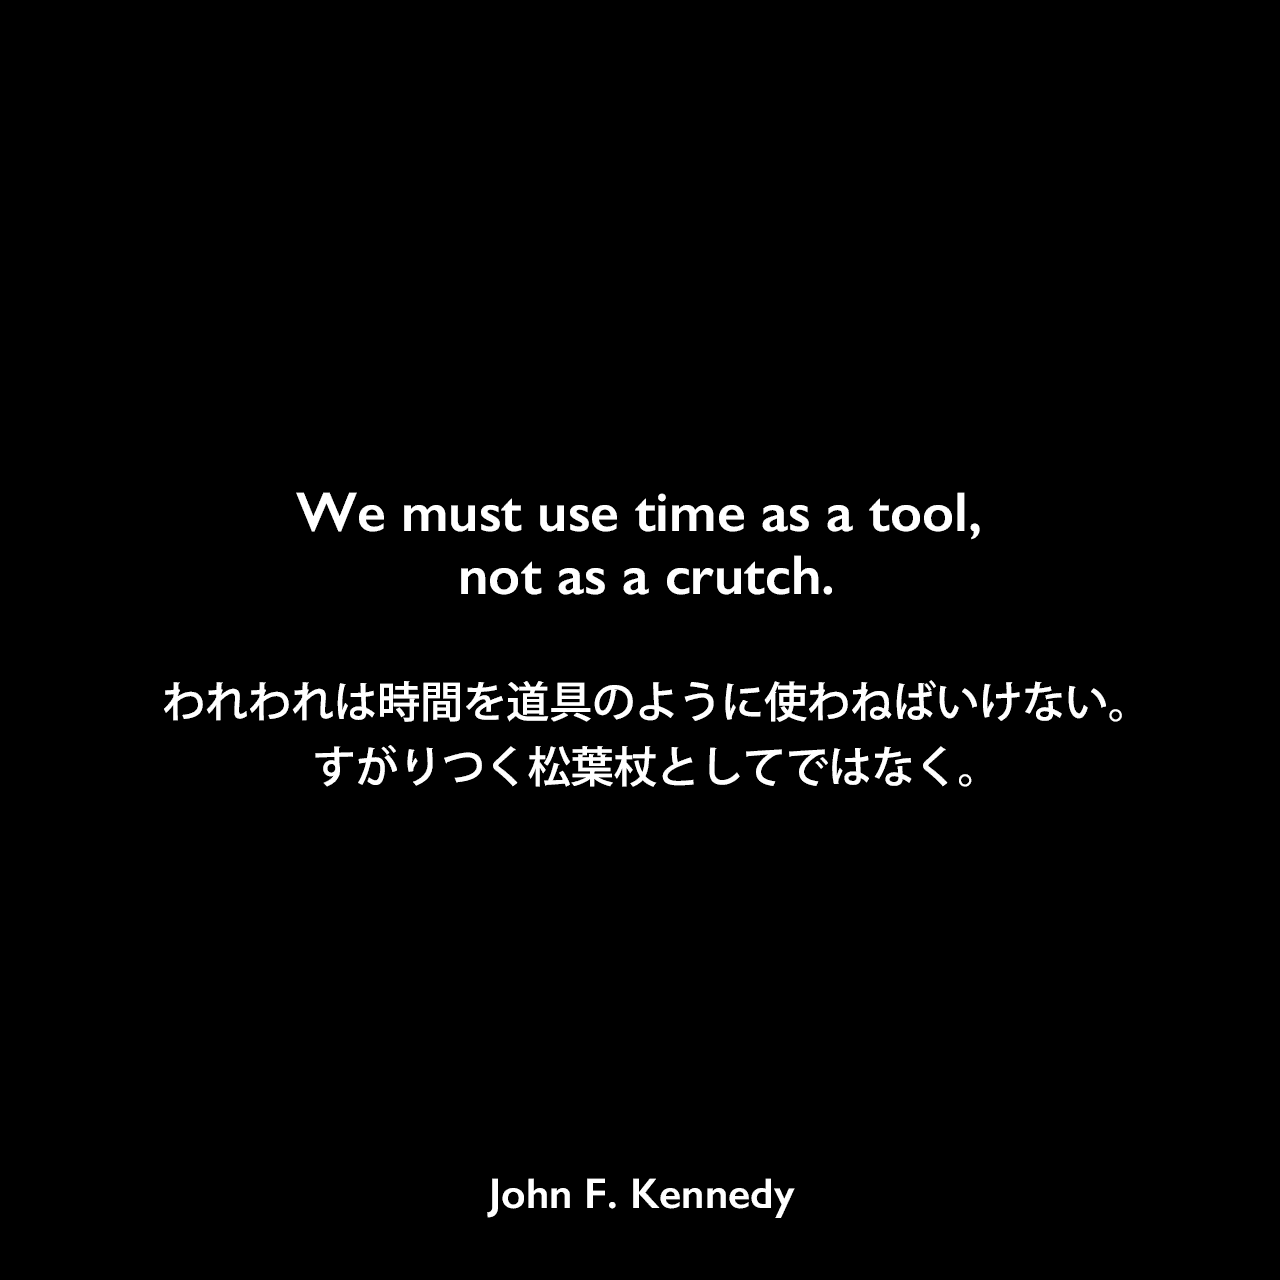 We must use time as a tool, not as a crutch.われわれは時間を道具のように使わねばいけない。すがりつく松葉杖としてではなく。John F Kennedy